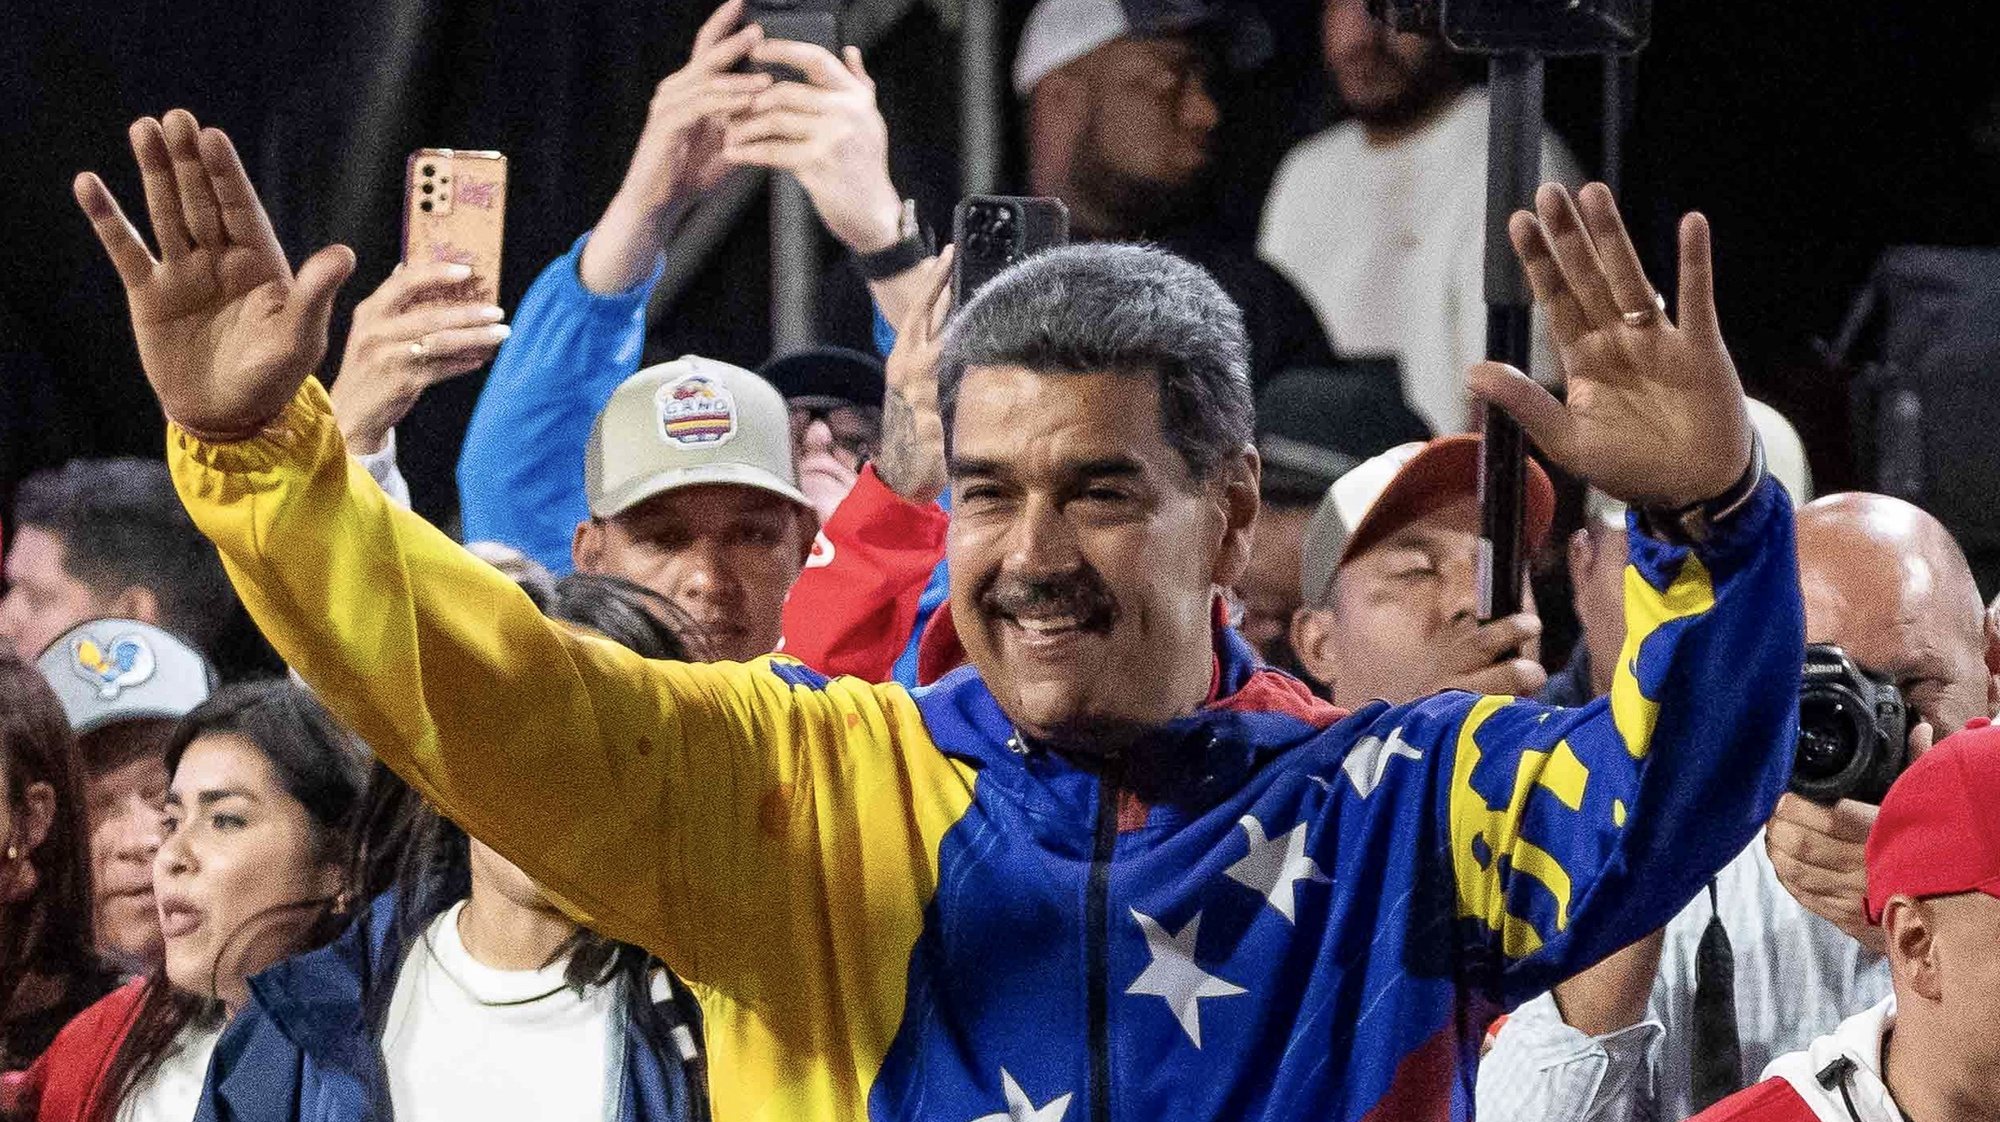 epa11504913 Venezuelan President Nicolas Maduro (C) celebrates after partial results were announced by the electoral council, in Caracas, Venezuela, 29 July 2024. According to the first report from the National Electoral Council (CNE), Maduro was re-elected for a third consecutive term in the elections held on 28 July, in which he obtained 51.2 percent of the votes (5,150,092 votes), while the standard-bearer of the majority opposition, Edmundo Gonzalez Urrutia, obtained 4,445,978 votes, which represents 44.2 percent of the votes.  EPA/RONALD PENA R.